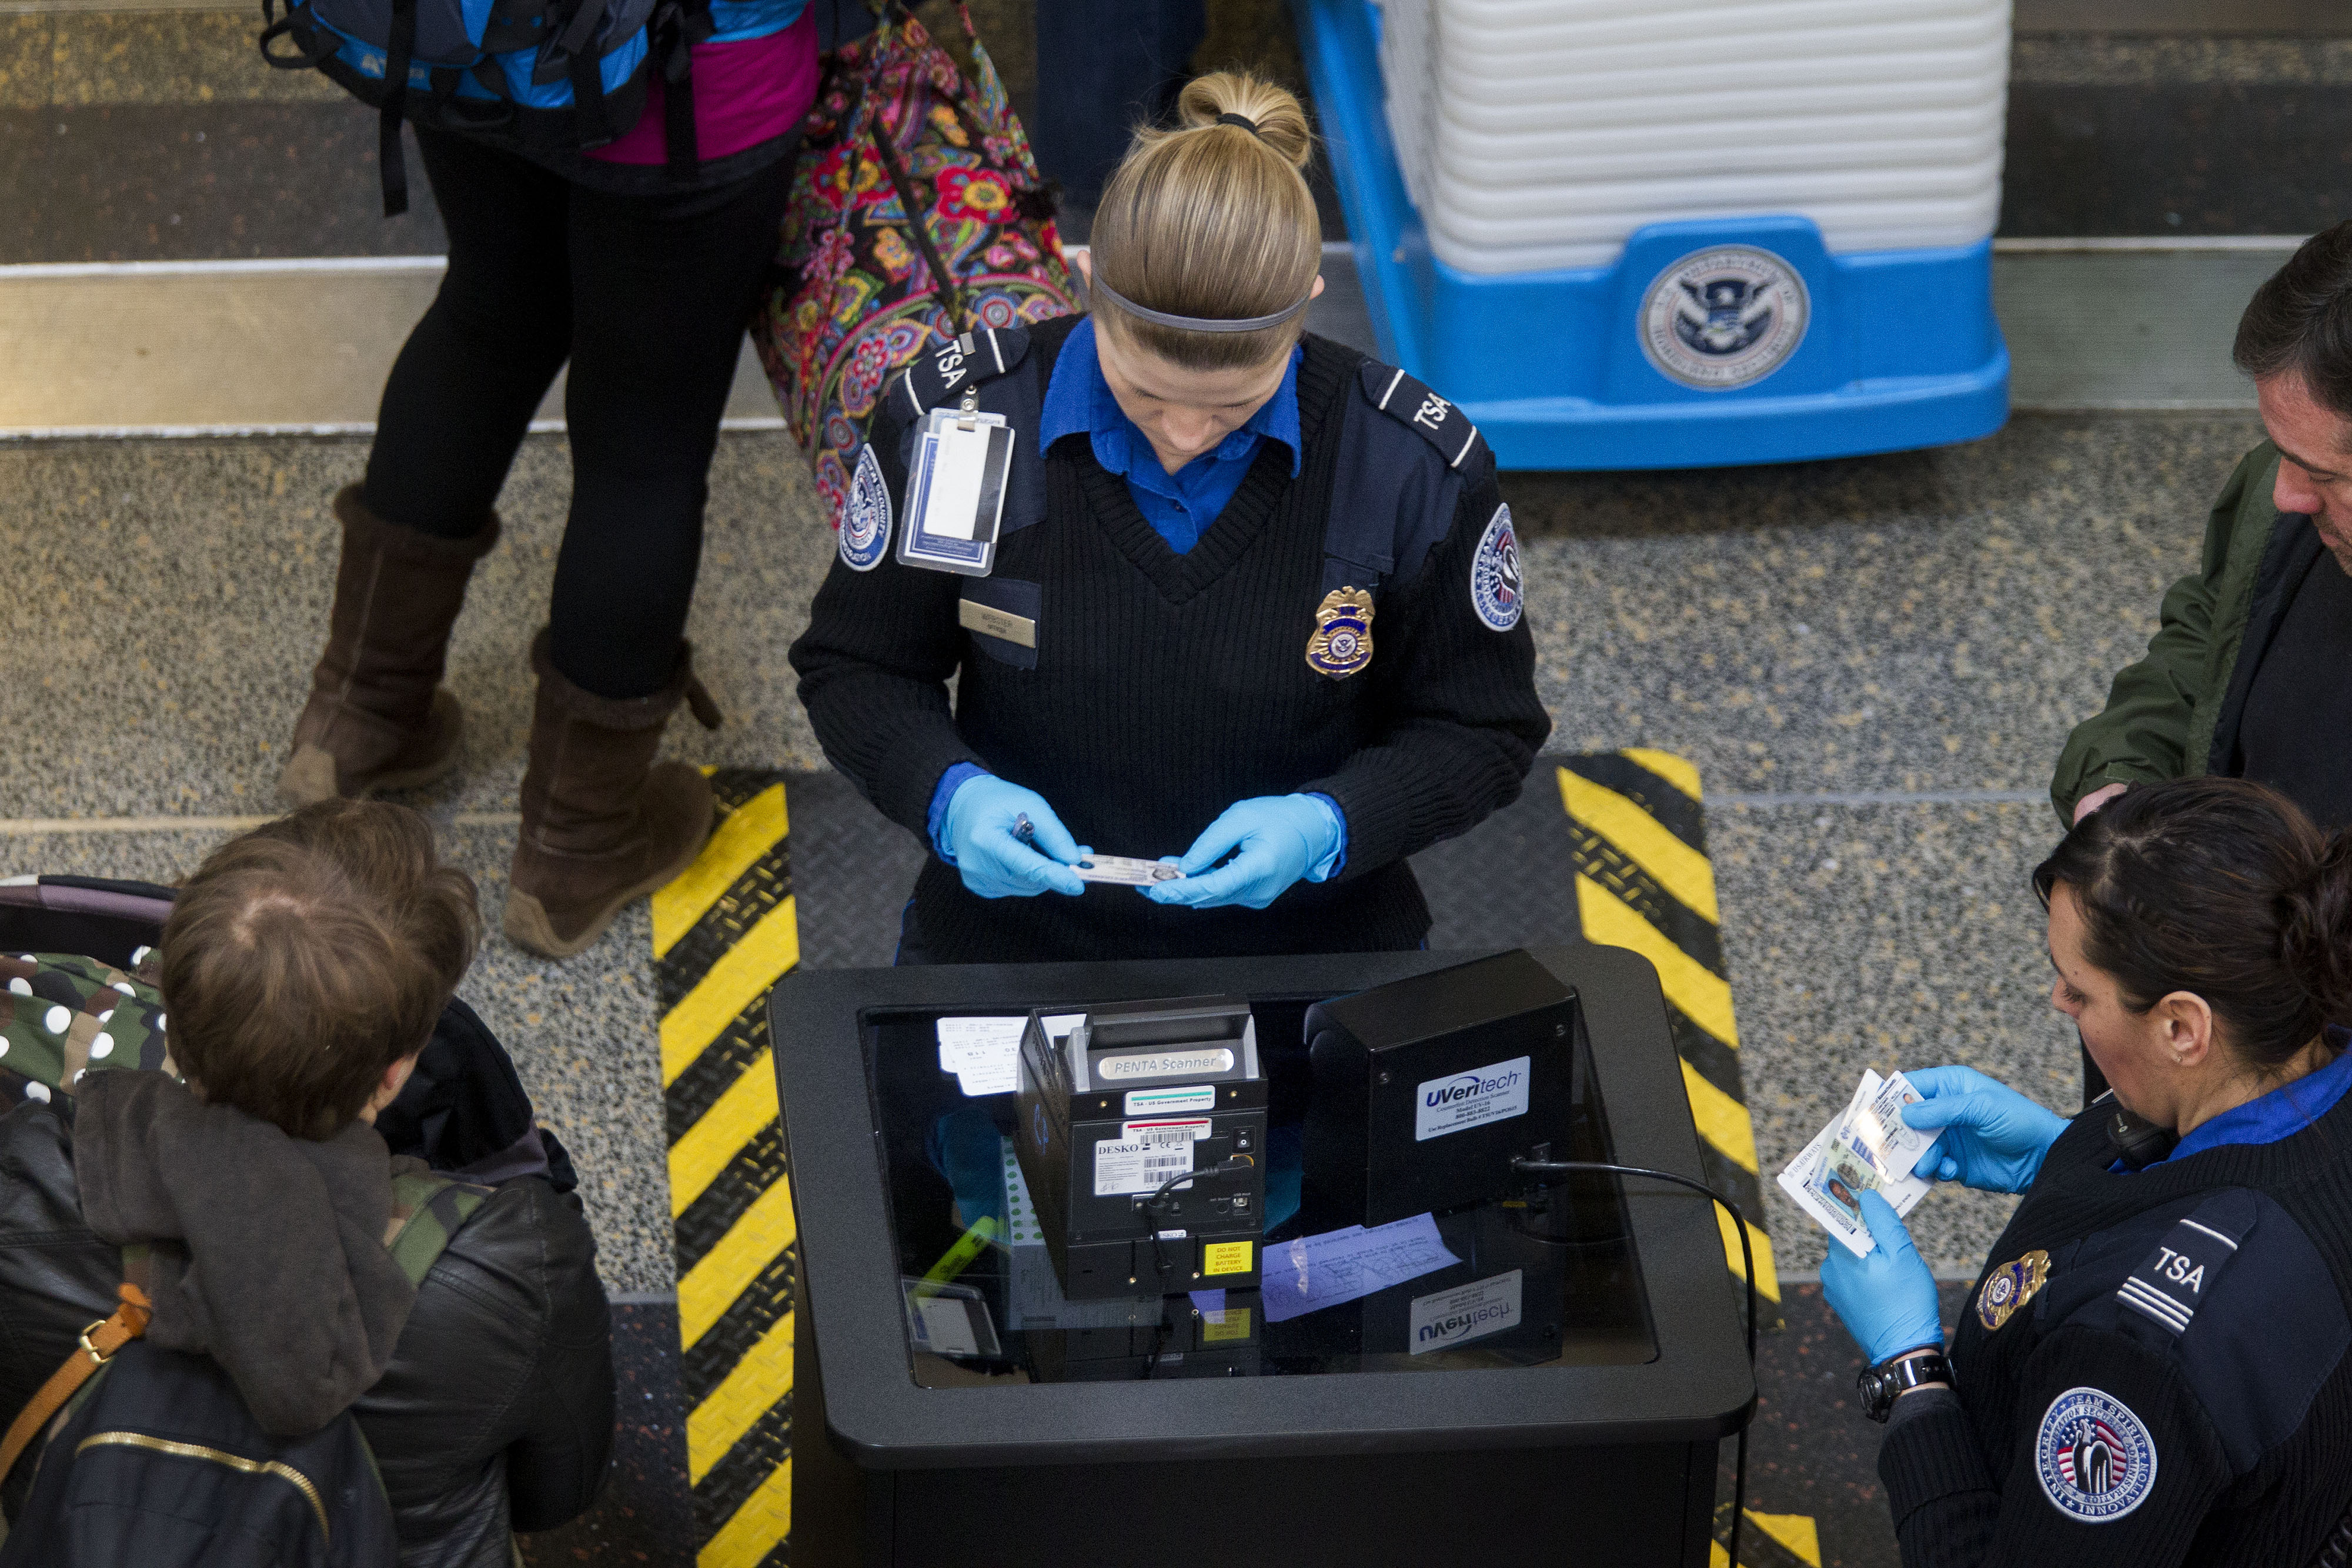 Transportation Security Administration (TSA) officers check passenger's identification at a security checkpoint at Ronald Reagan National Airport (DCA) in Washington, D.C., U.S., on Wednesday, Feb. 25, 2015. Financing for the U.S. Department of Homeland Security (DHS) is set to lapse after Friday and the agency would face a partial shutdown unless Congress provides new money. More than 200,000 government employees deemed essential at DHS, including TSA officers, would still have to report to their posts, even though their pay would stop unless Congress finds a solution. Photographer: Andrew Harrer/Bloomberg via Getty Images (Bloomberg&mdash;Bloomberg via Getty Images)